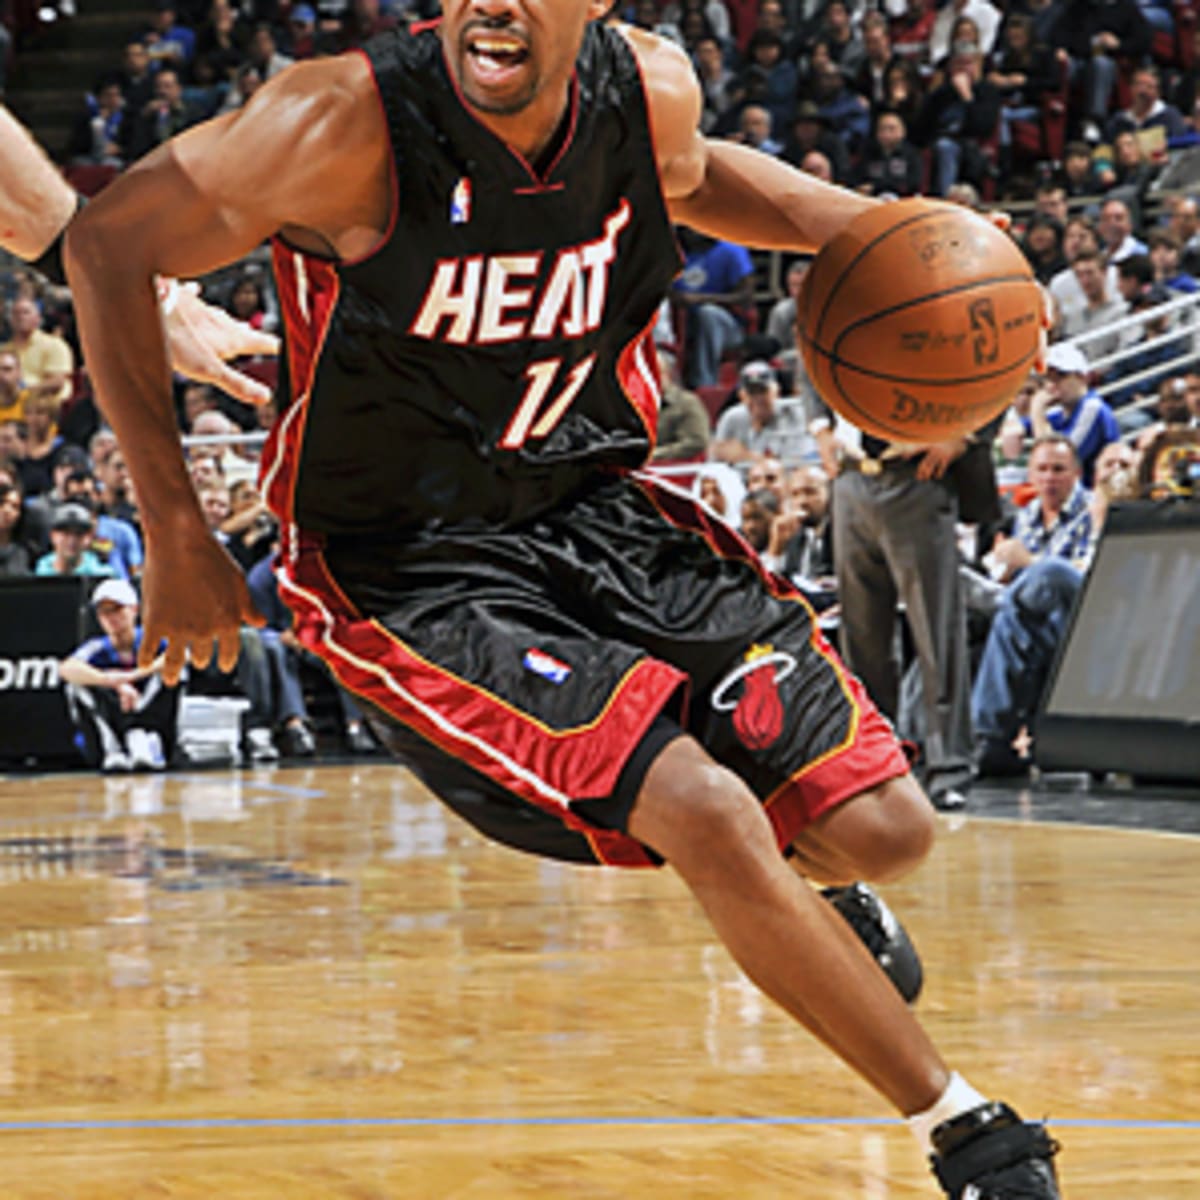 Miami Heat guard Rafer Alston, right, attempts to steal the ball